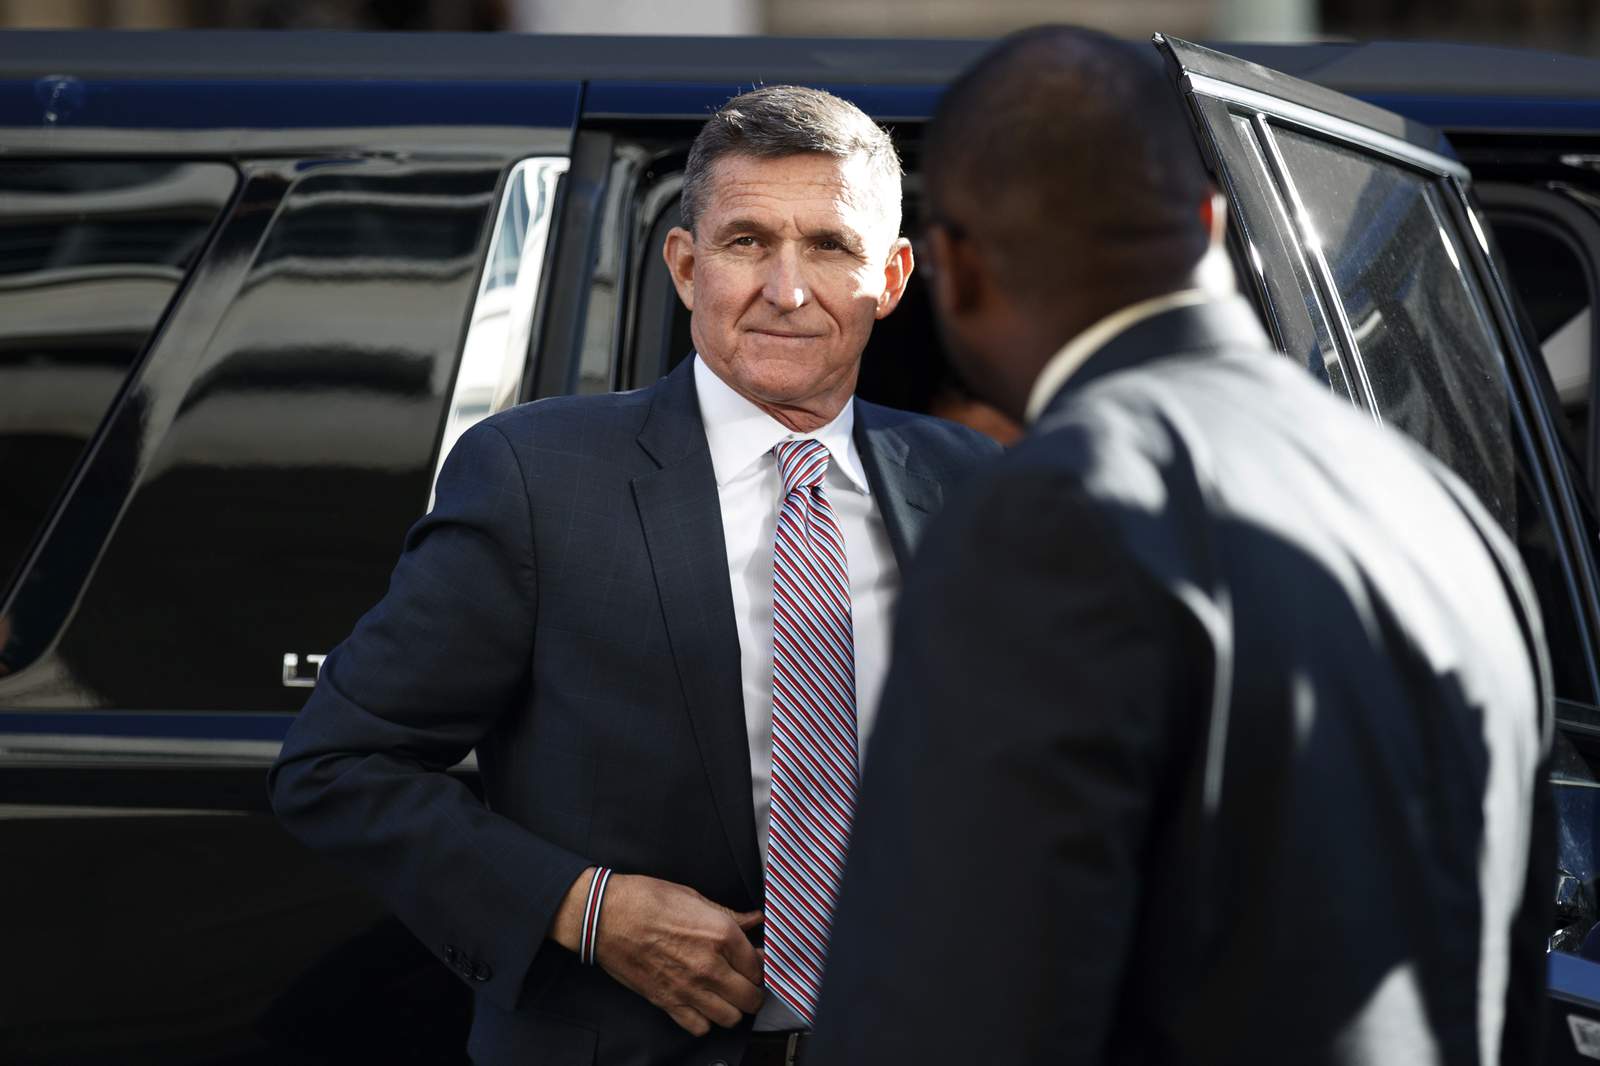 Full appeals court to review dismissal of Michael Flynn case